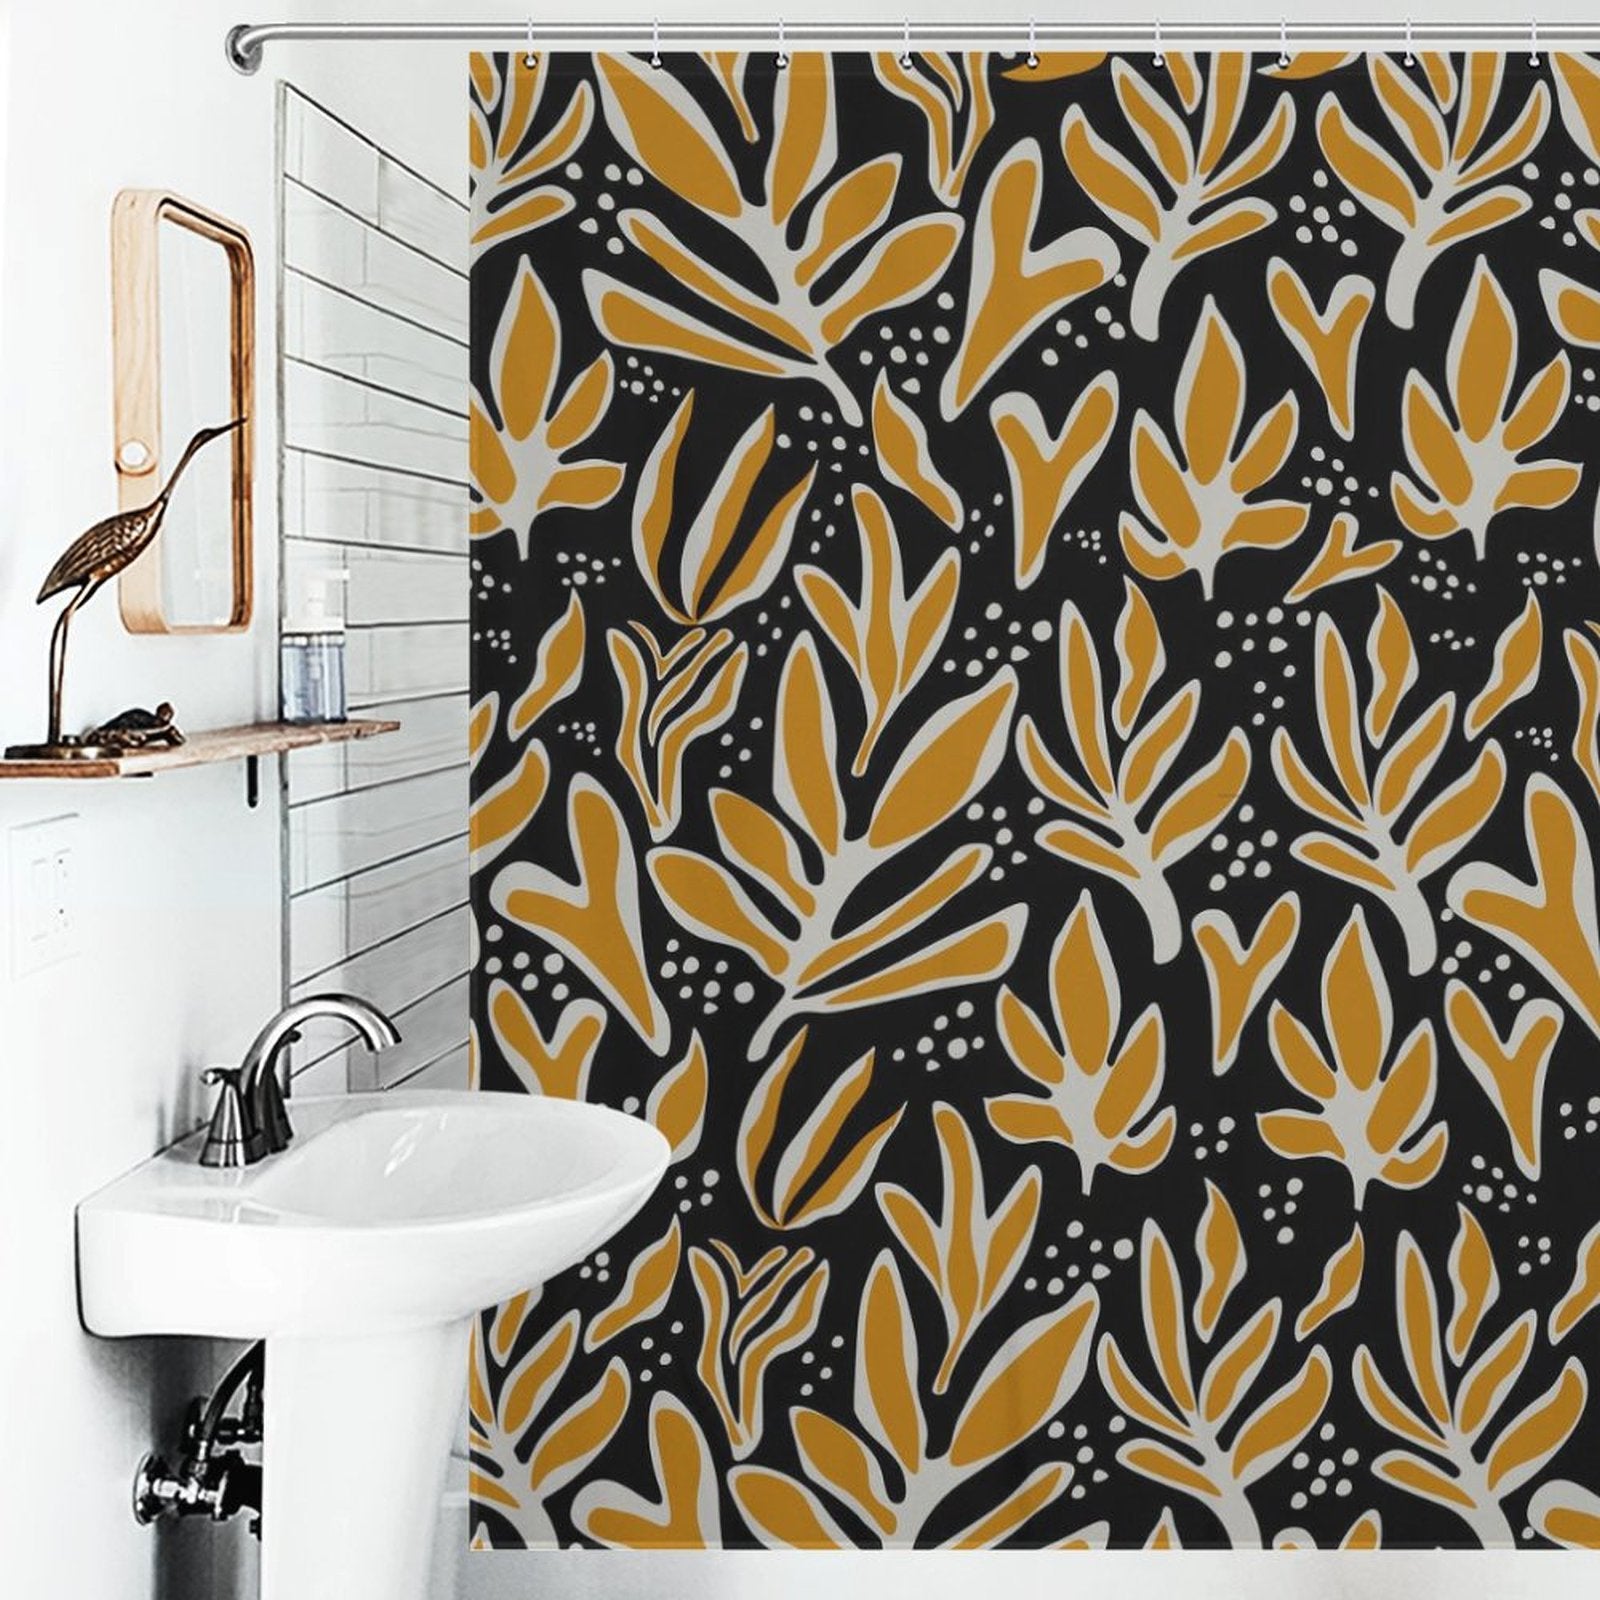 A bathroom with a white sink and a decorative brown bird figure on a shelf. The shower curtain features an **Abstract Vintage Boho Yellow Leaves Art Mid Century Leaf Shower Curtain-Cottoncat by Cotton Cat** in yellow and white on a dark background.